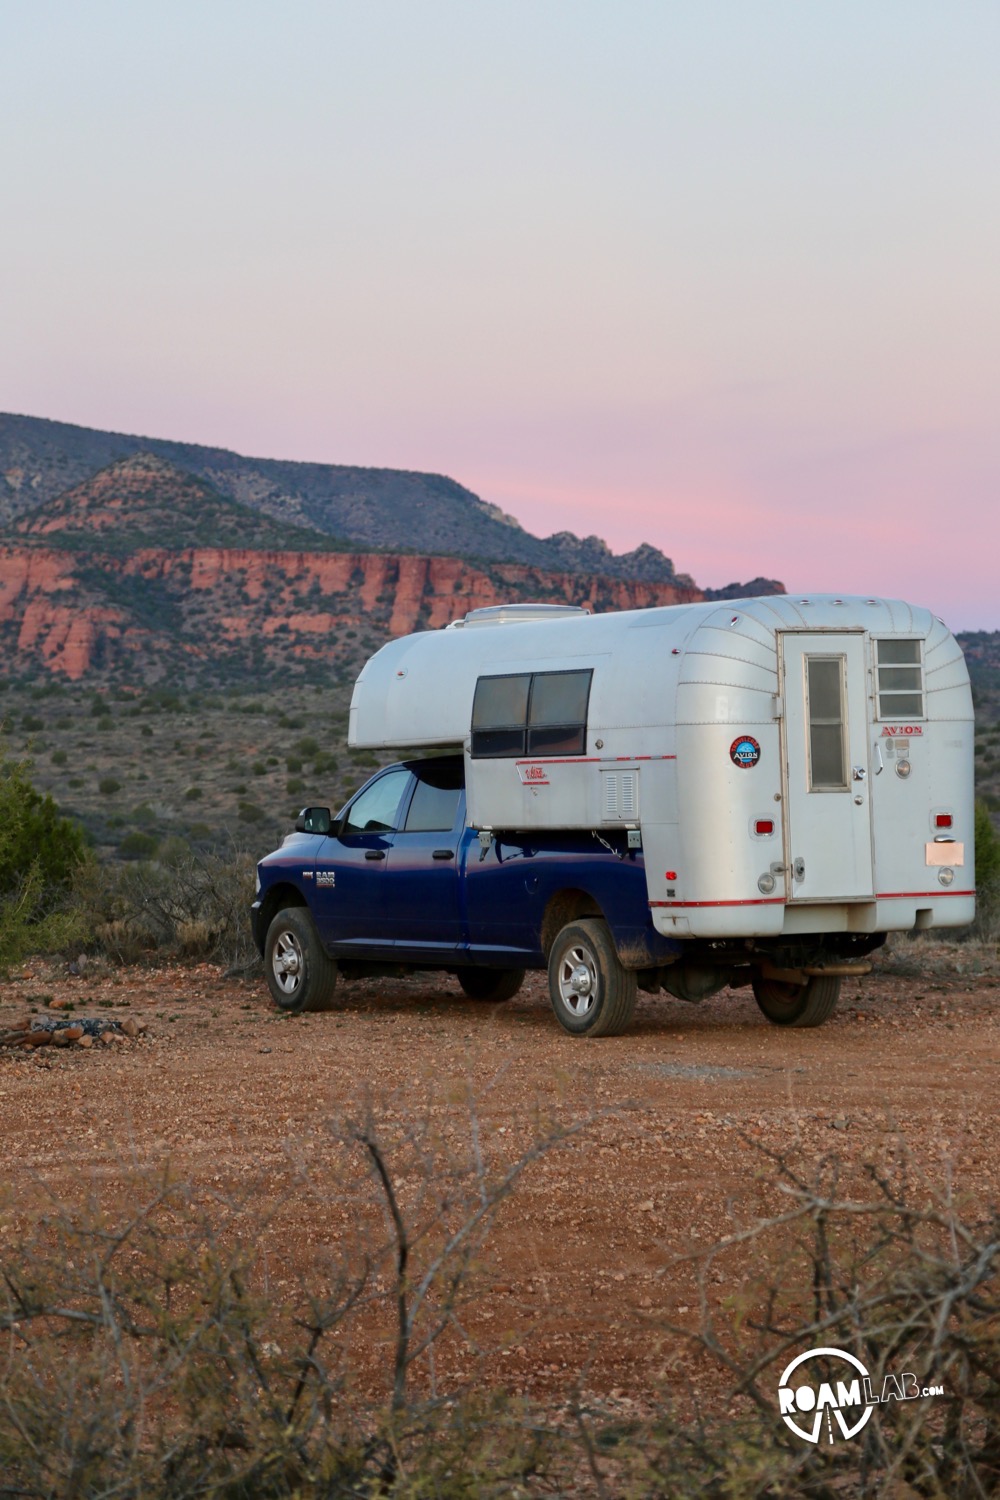 Like any tourist destination, finding a place to stay is a challenge. Most campgrounds are booked out in advance. But, if you have 4-wheel drive and a willingness to rough it without facilities, there are undeveloped campsites with amazing vistas along Forest Road 525C.